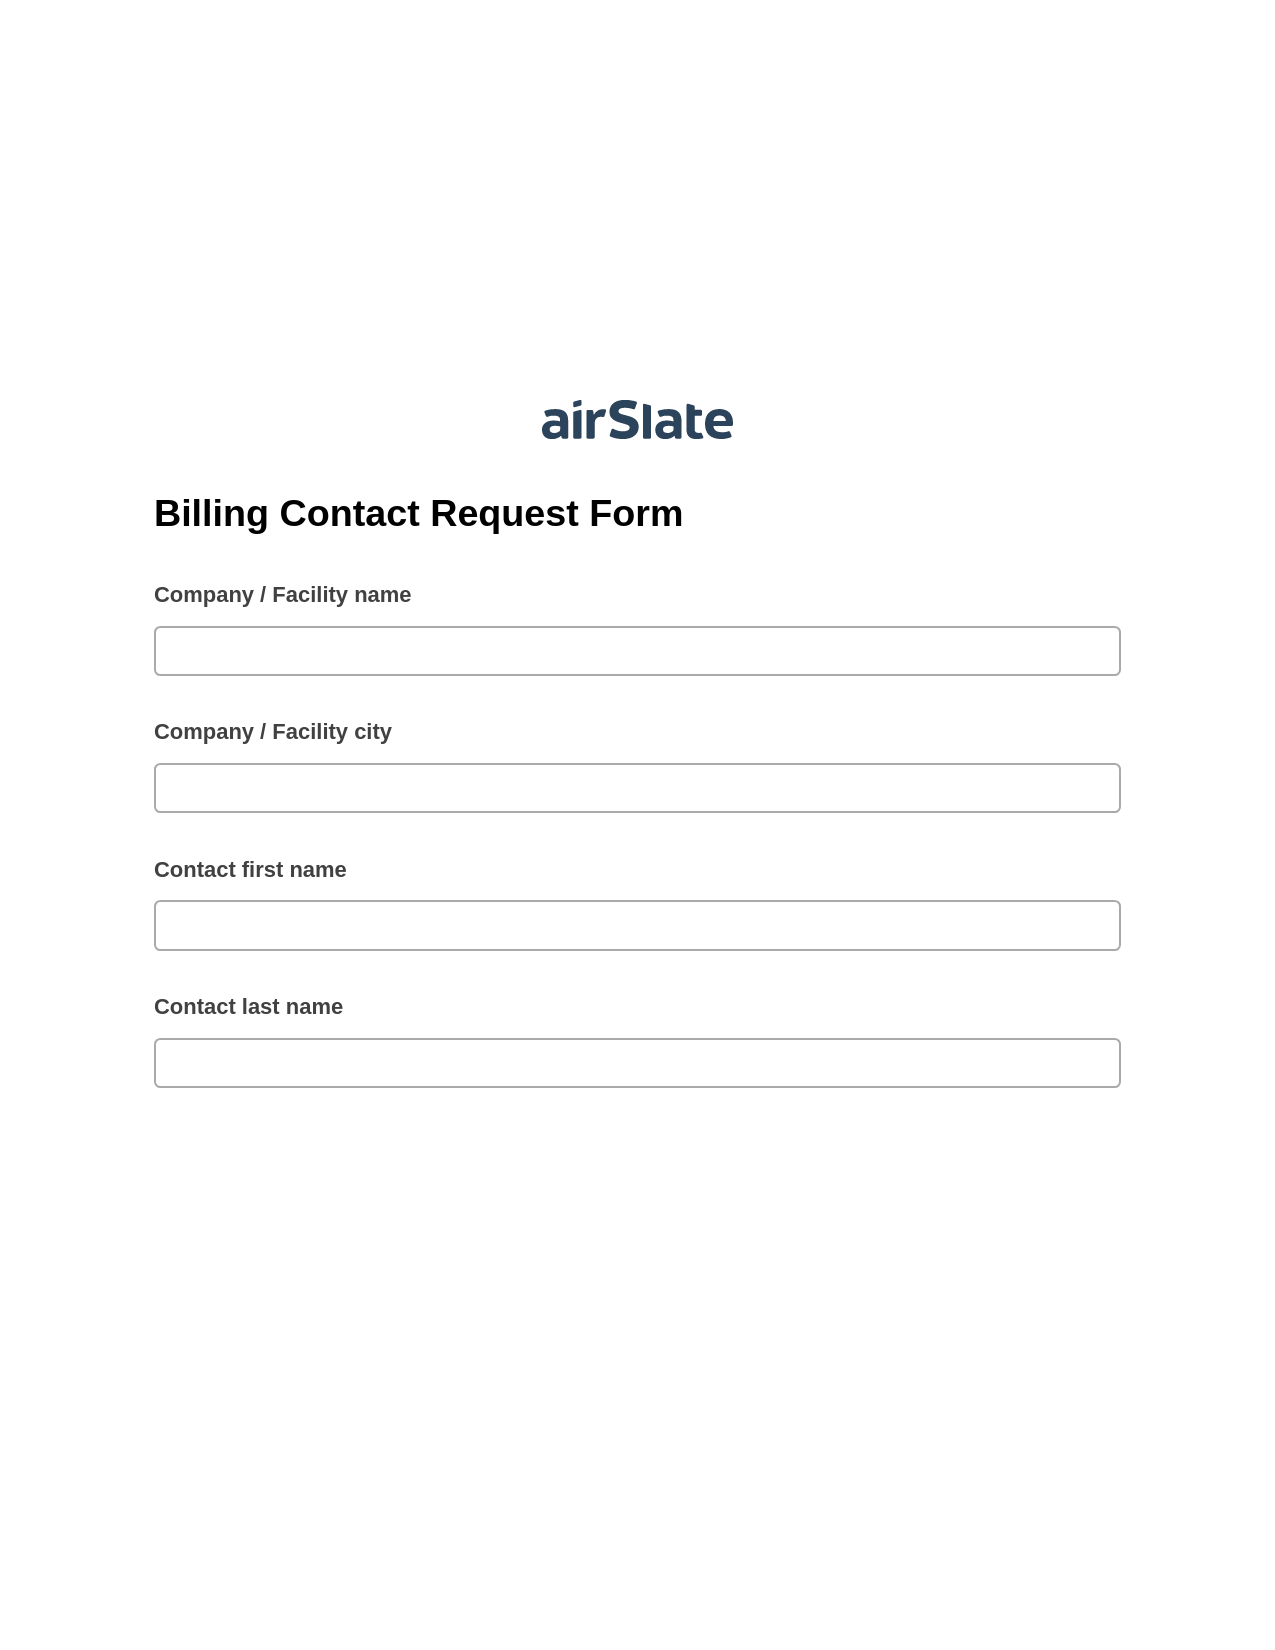 Billing Contact Request Form Pre-fill Dropdown from Airtable, Email Notification Bot, Text Message Notification Postfinish Bot